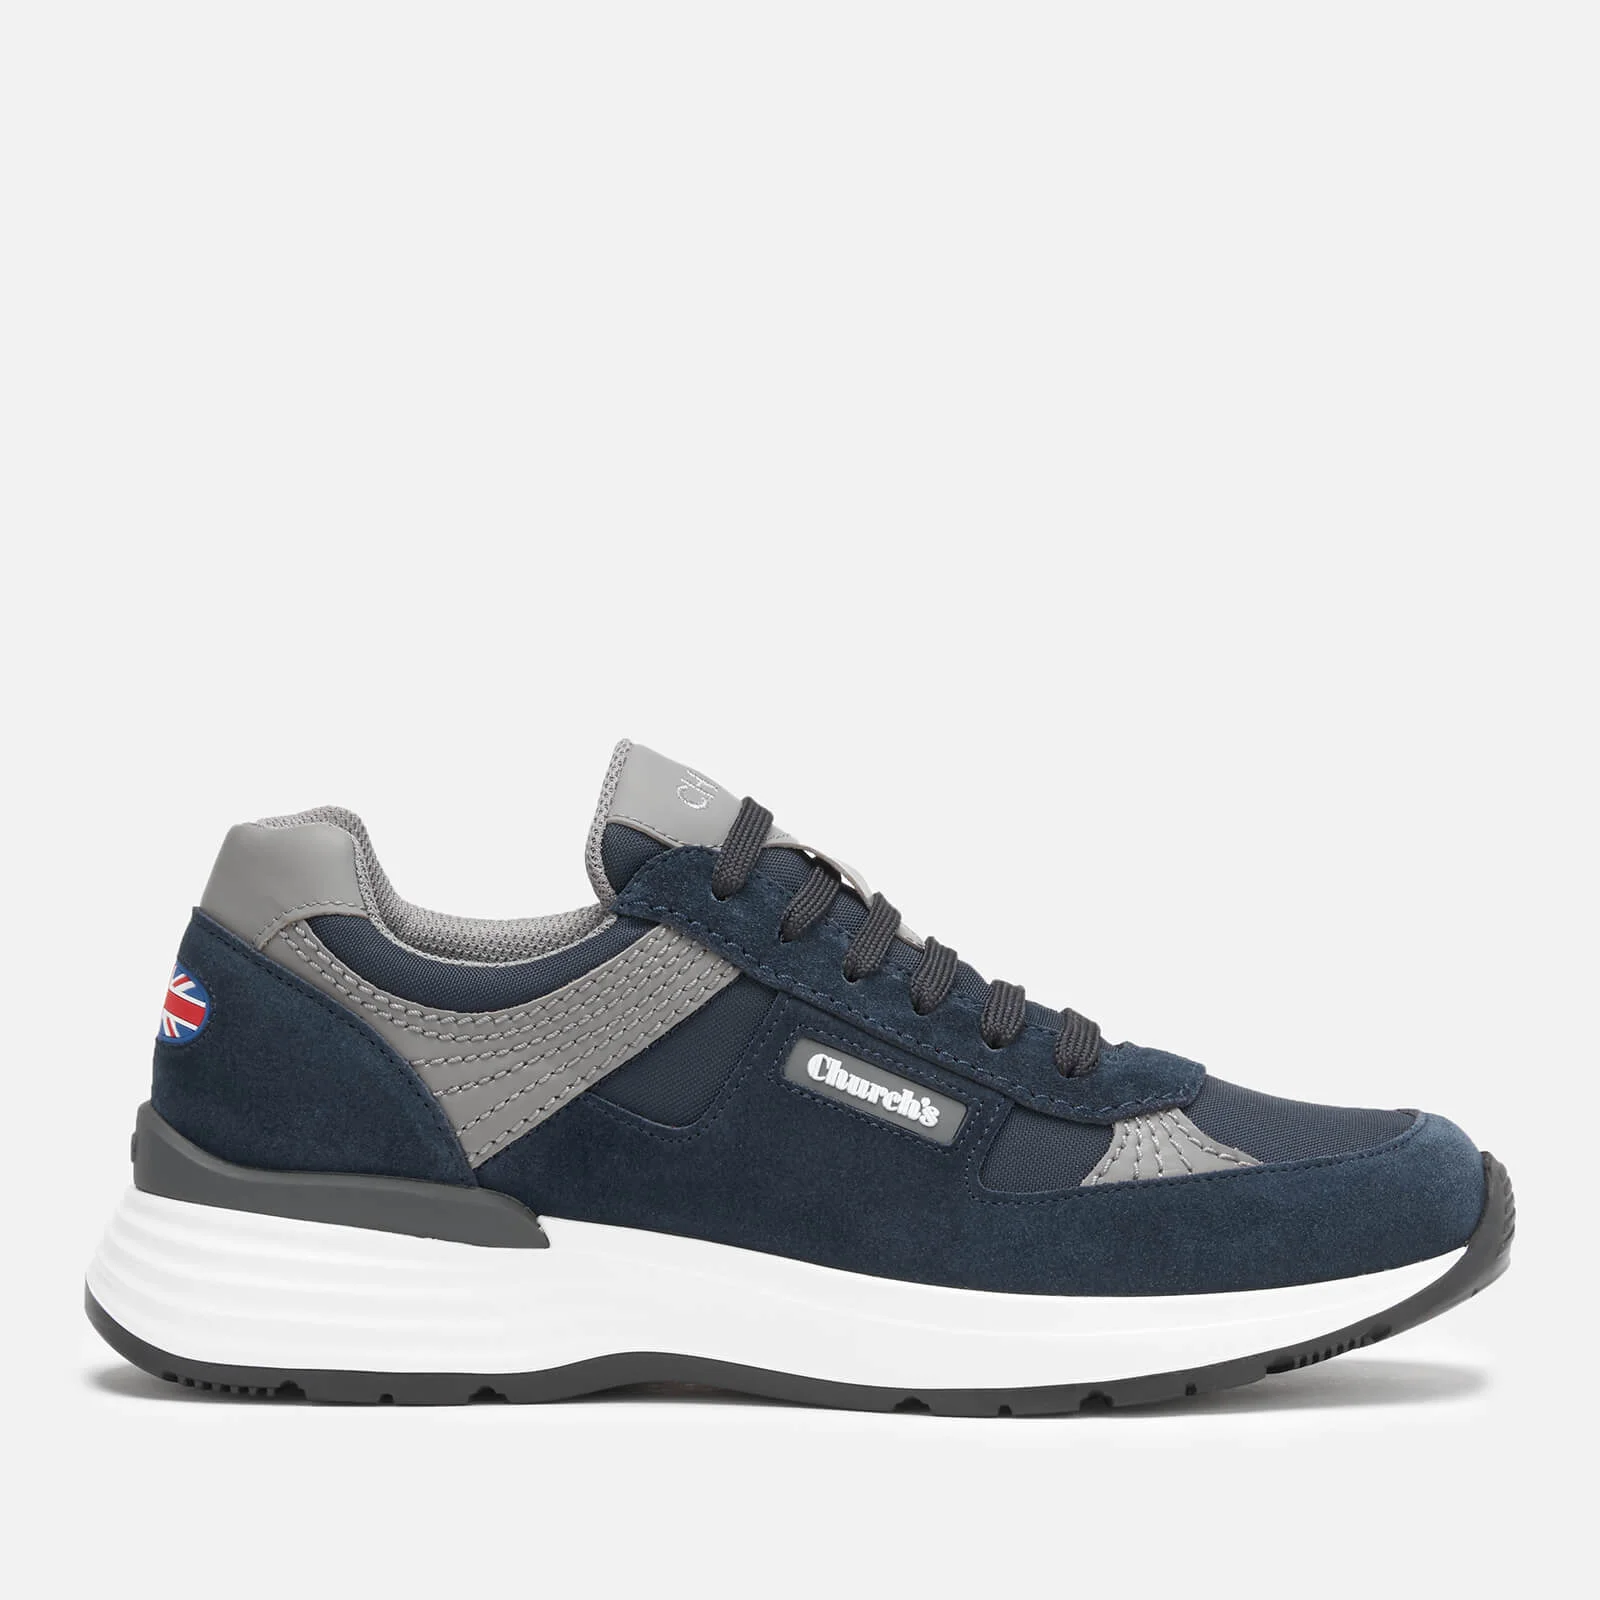 Church's Men's Suede/Nylon Runner Style Trainers - Blue Image 1